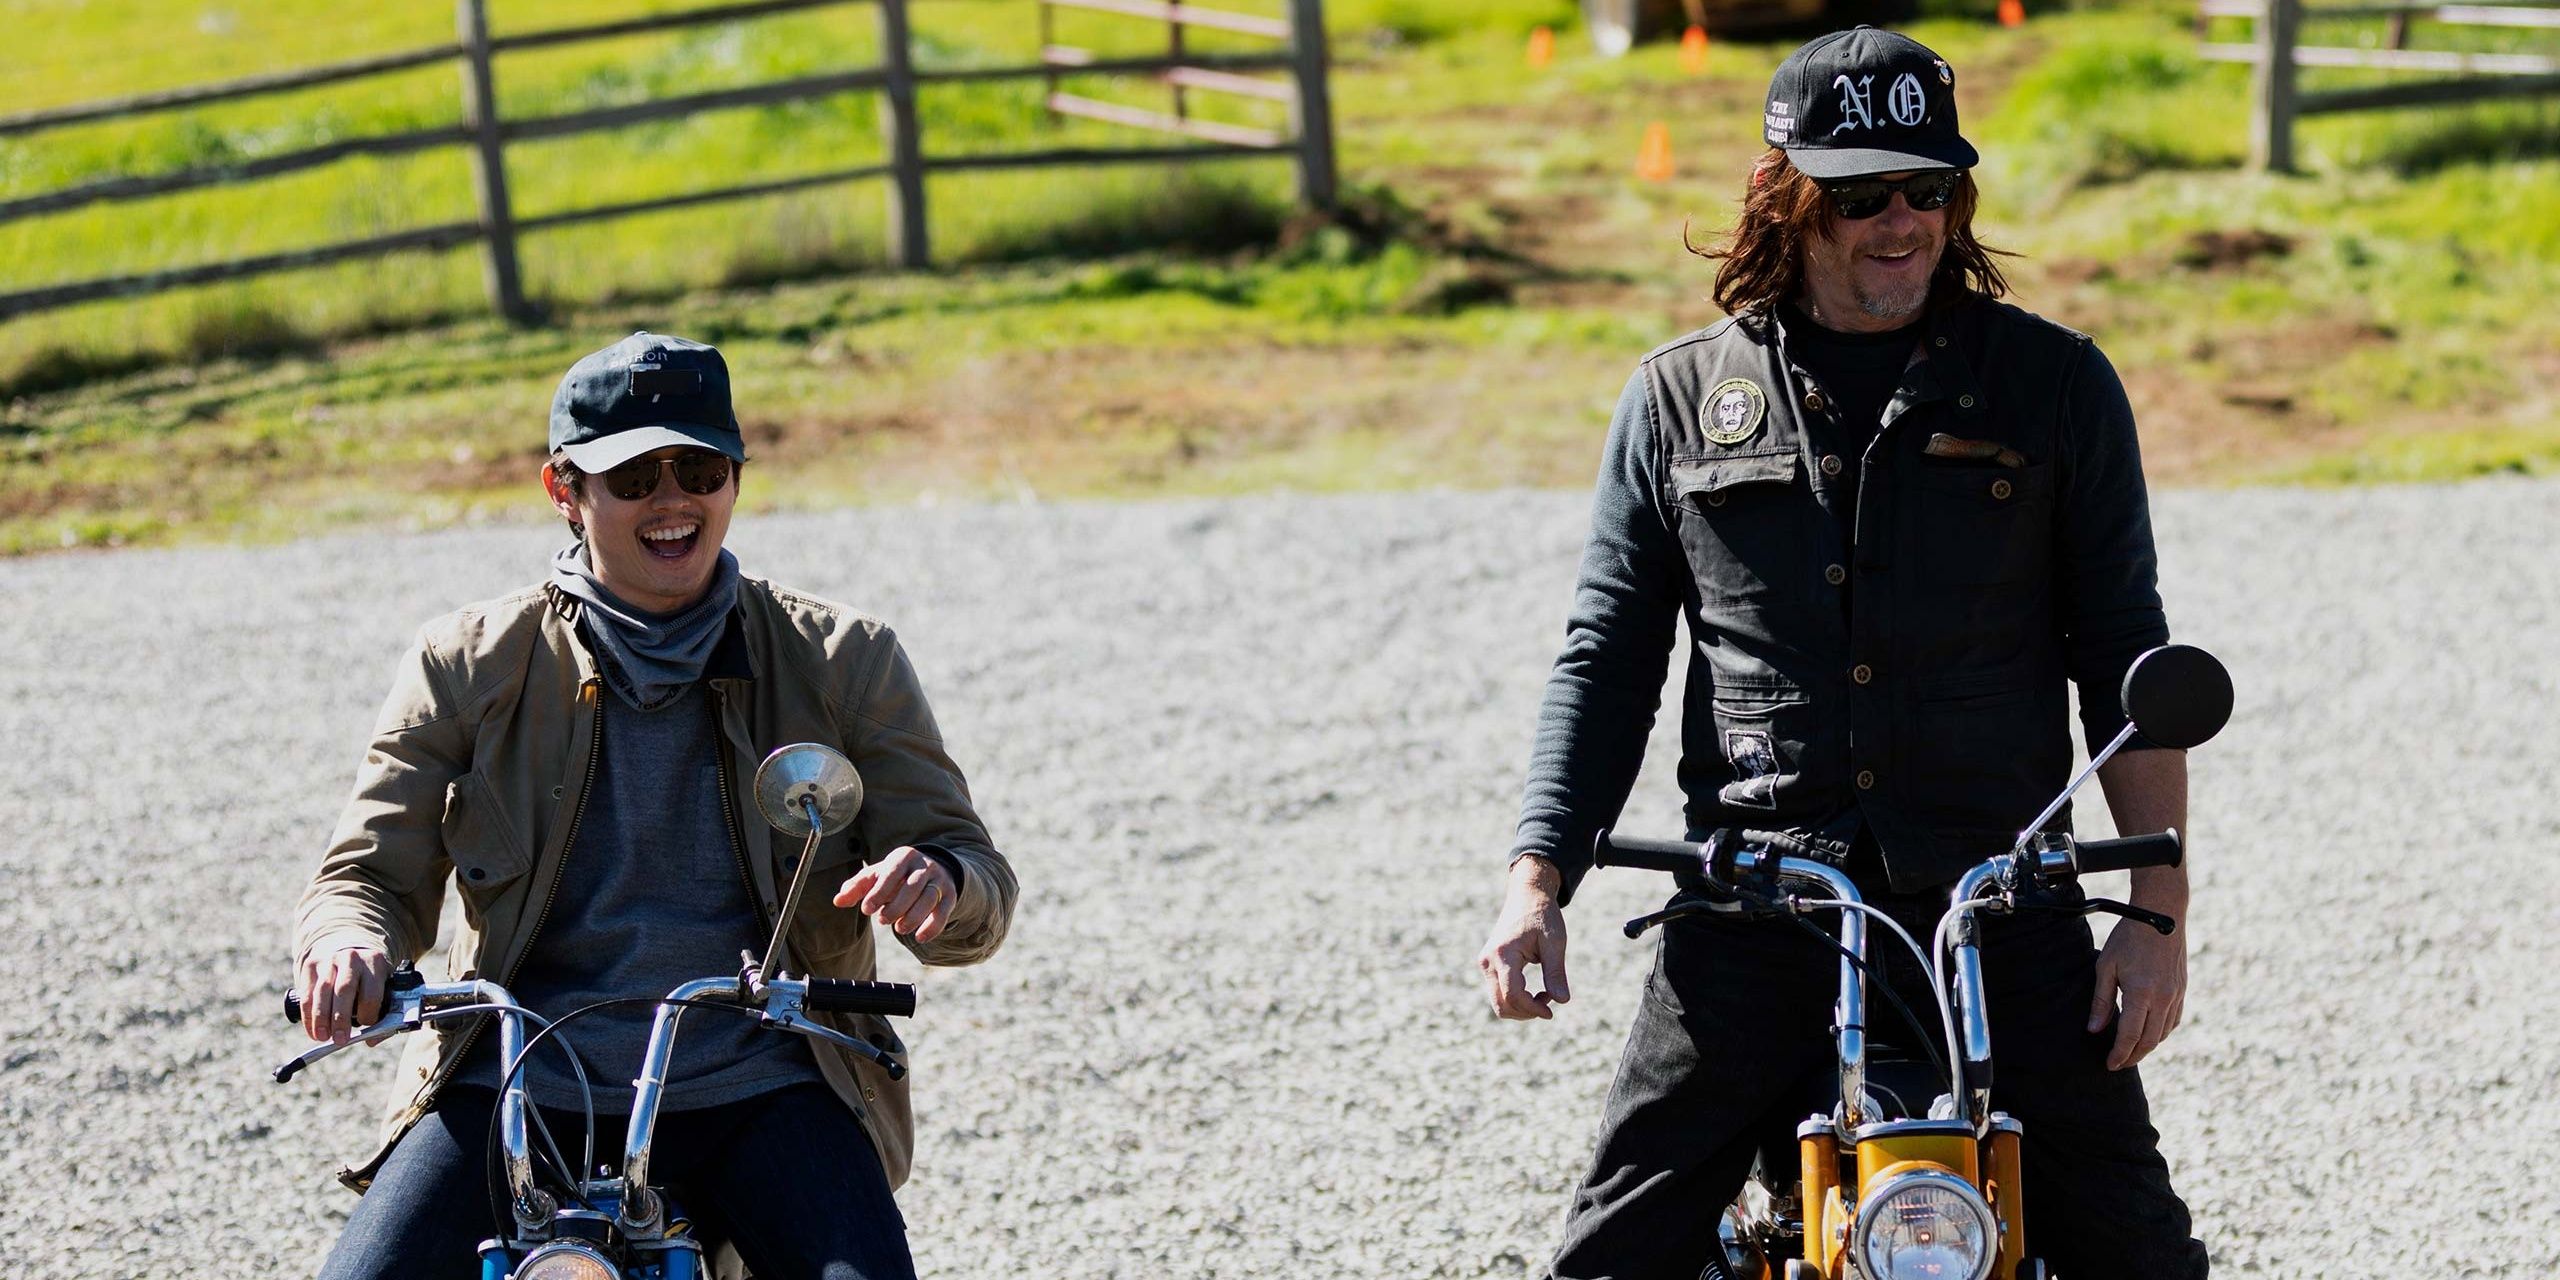 steven yeun on a motorcycle with norman reedus on amc's ride